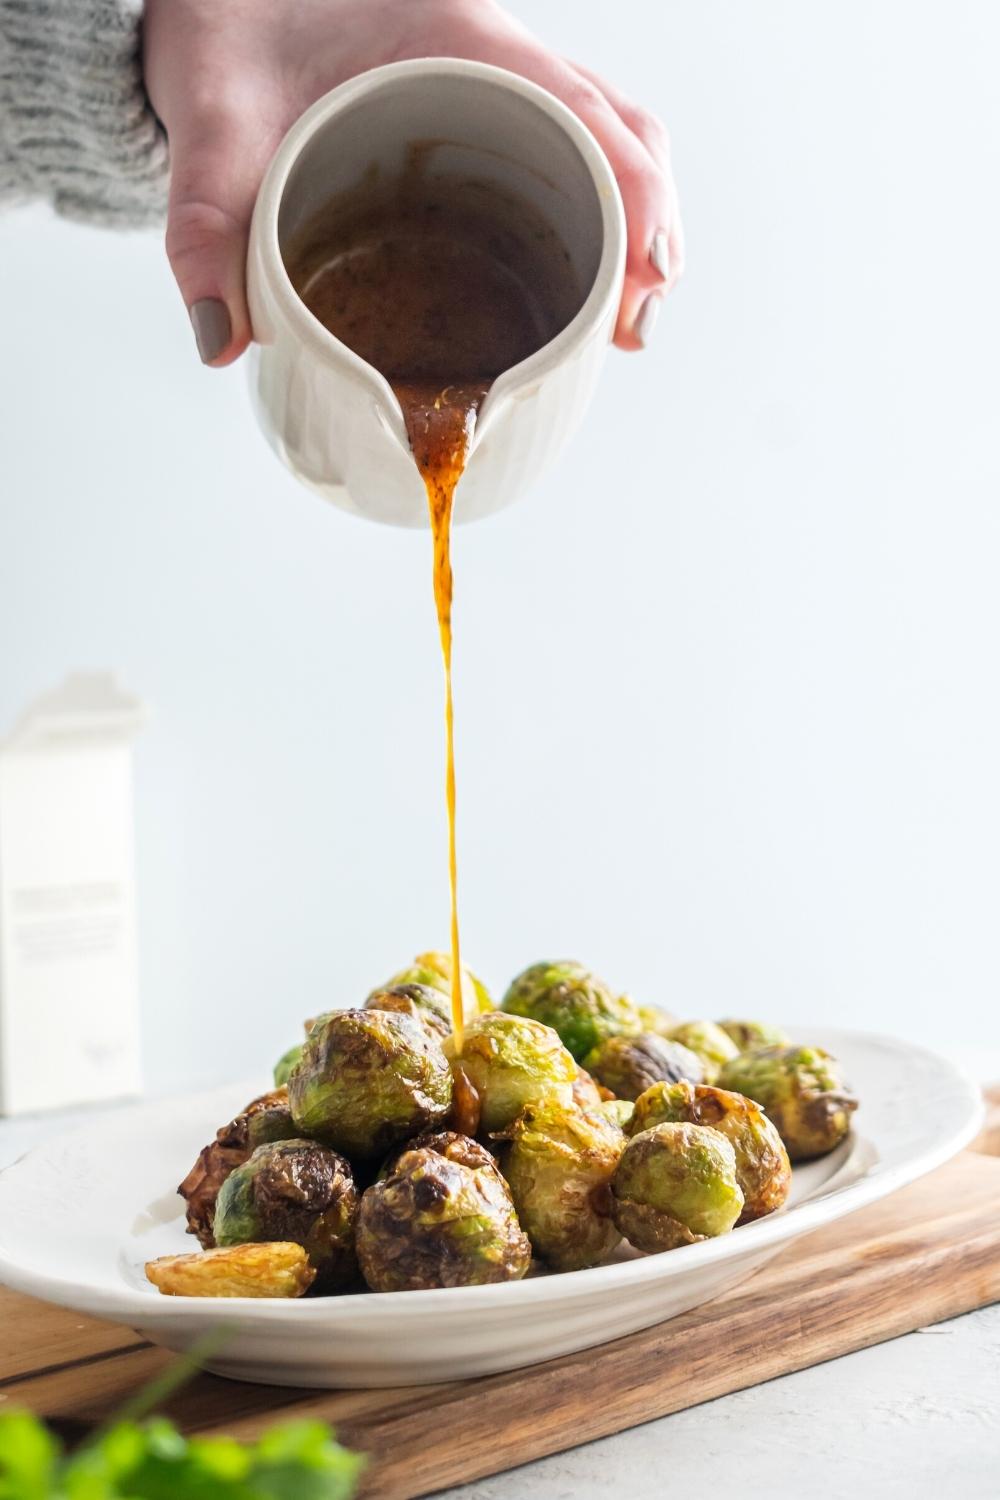 A hand holding a pitcher drizzling honey on top of brussel sprouts on a plate.